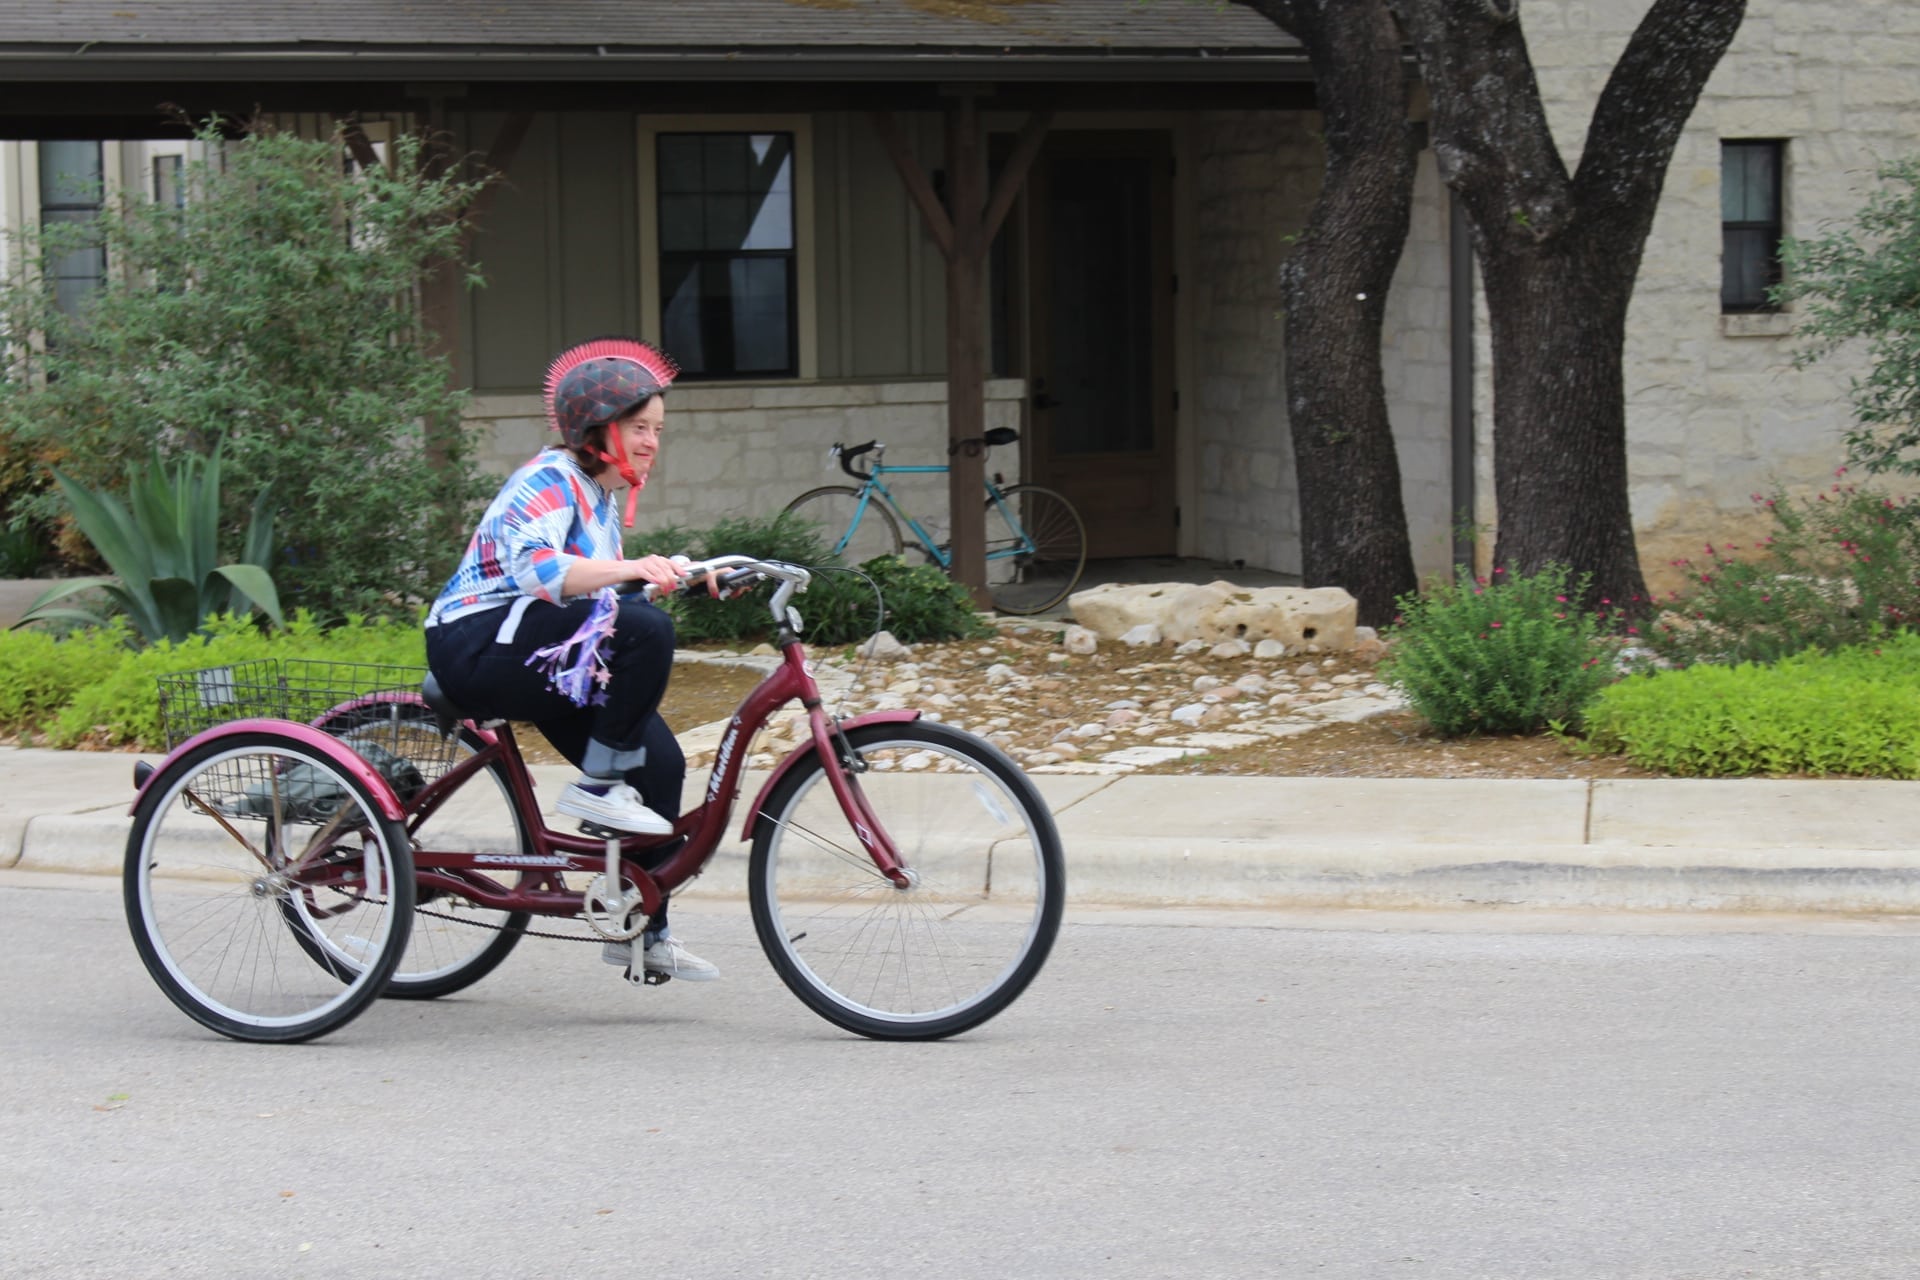 A young female resident wearing a helmet pedals an adult tricycle on the Marbridge campus.